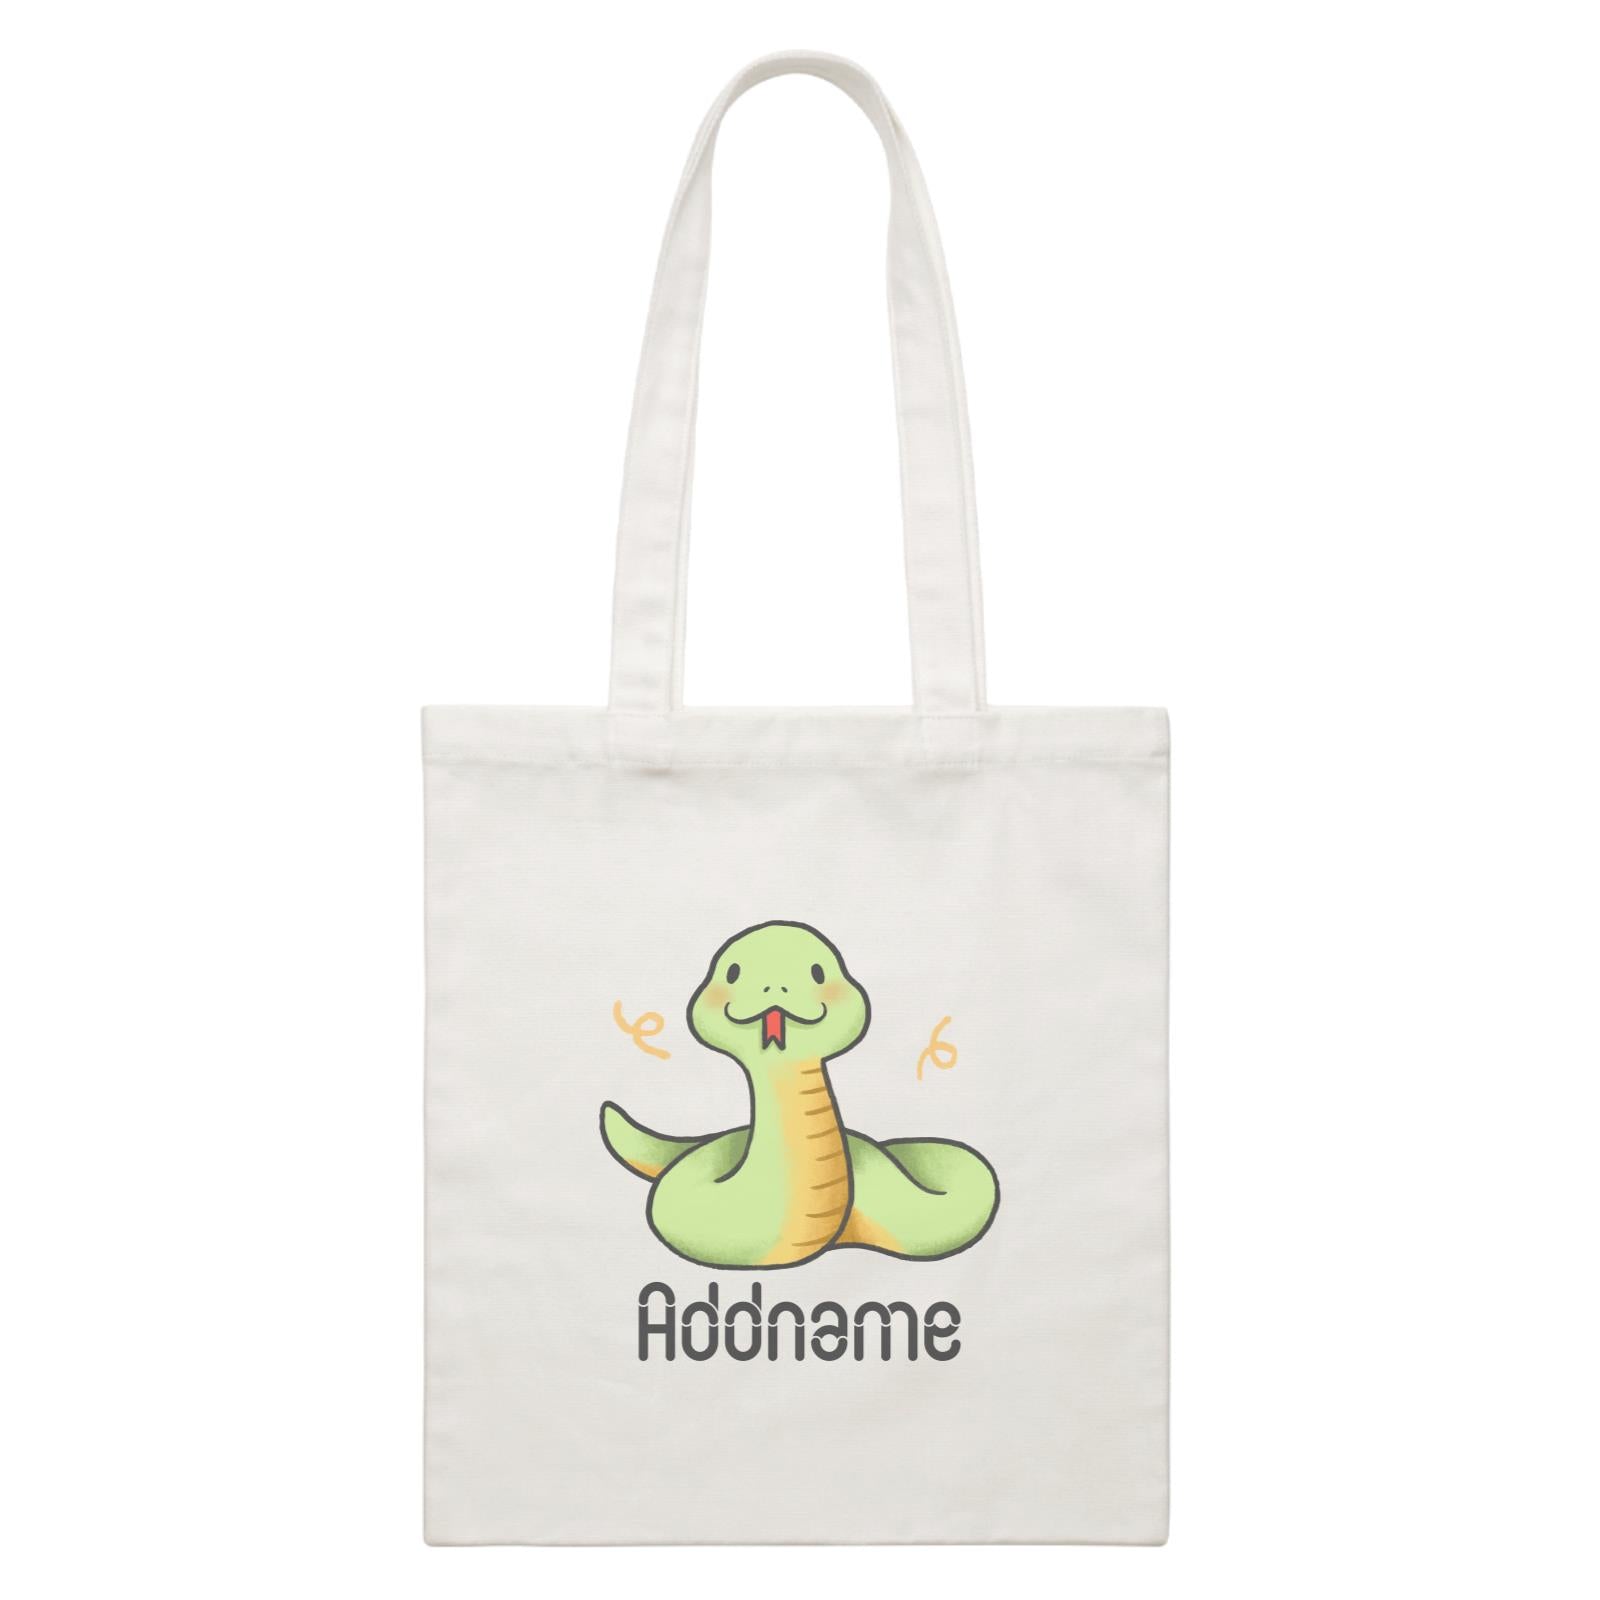 Cute Hand Drawn Style Snake Addname White Canvas Bag